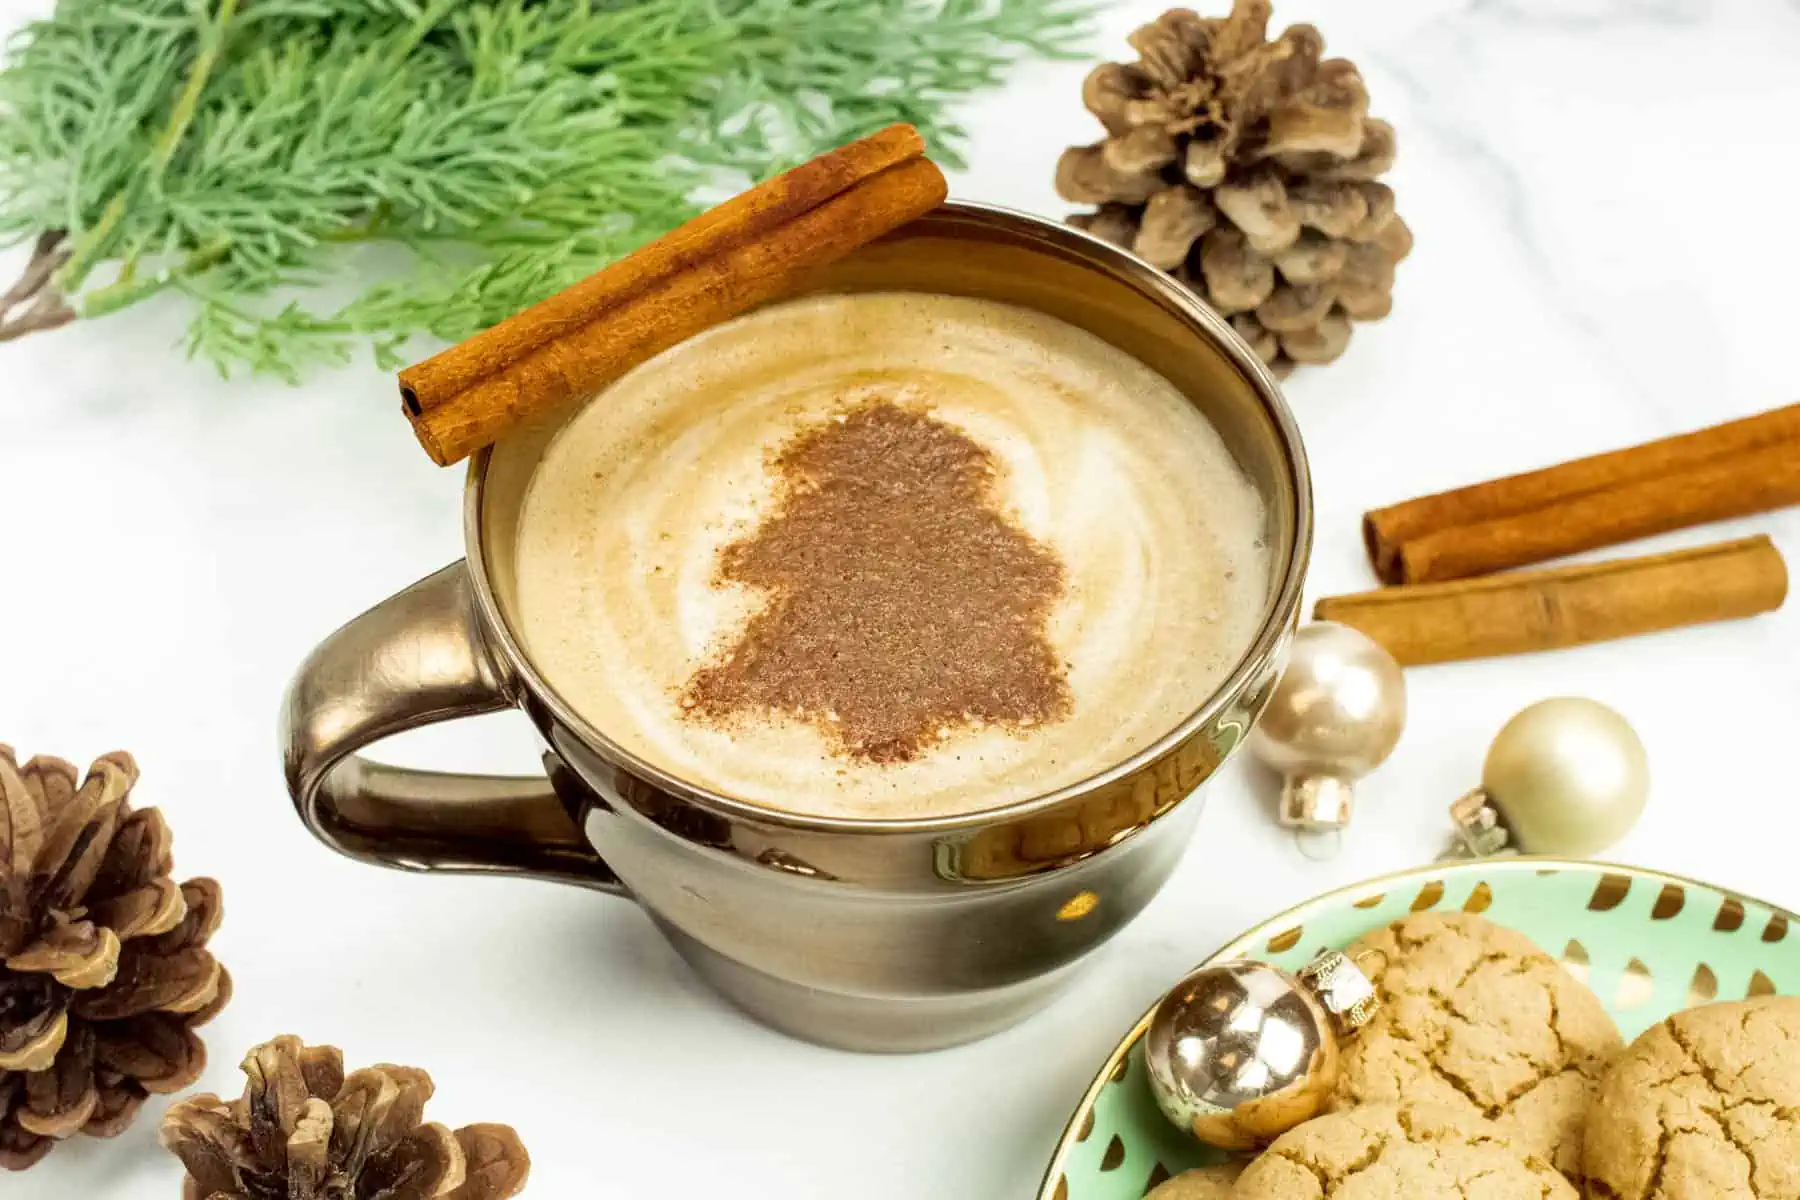 A decorative gold mug with a Christmas tree garnish is surrounded by cinnamon sticks, gingerbread cookies, pinecones and evergreen boughs.